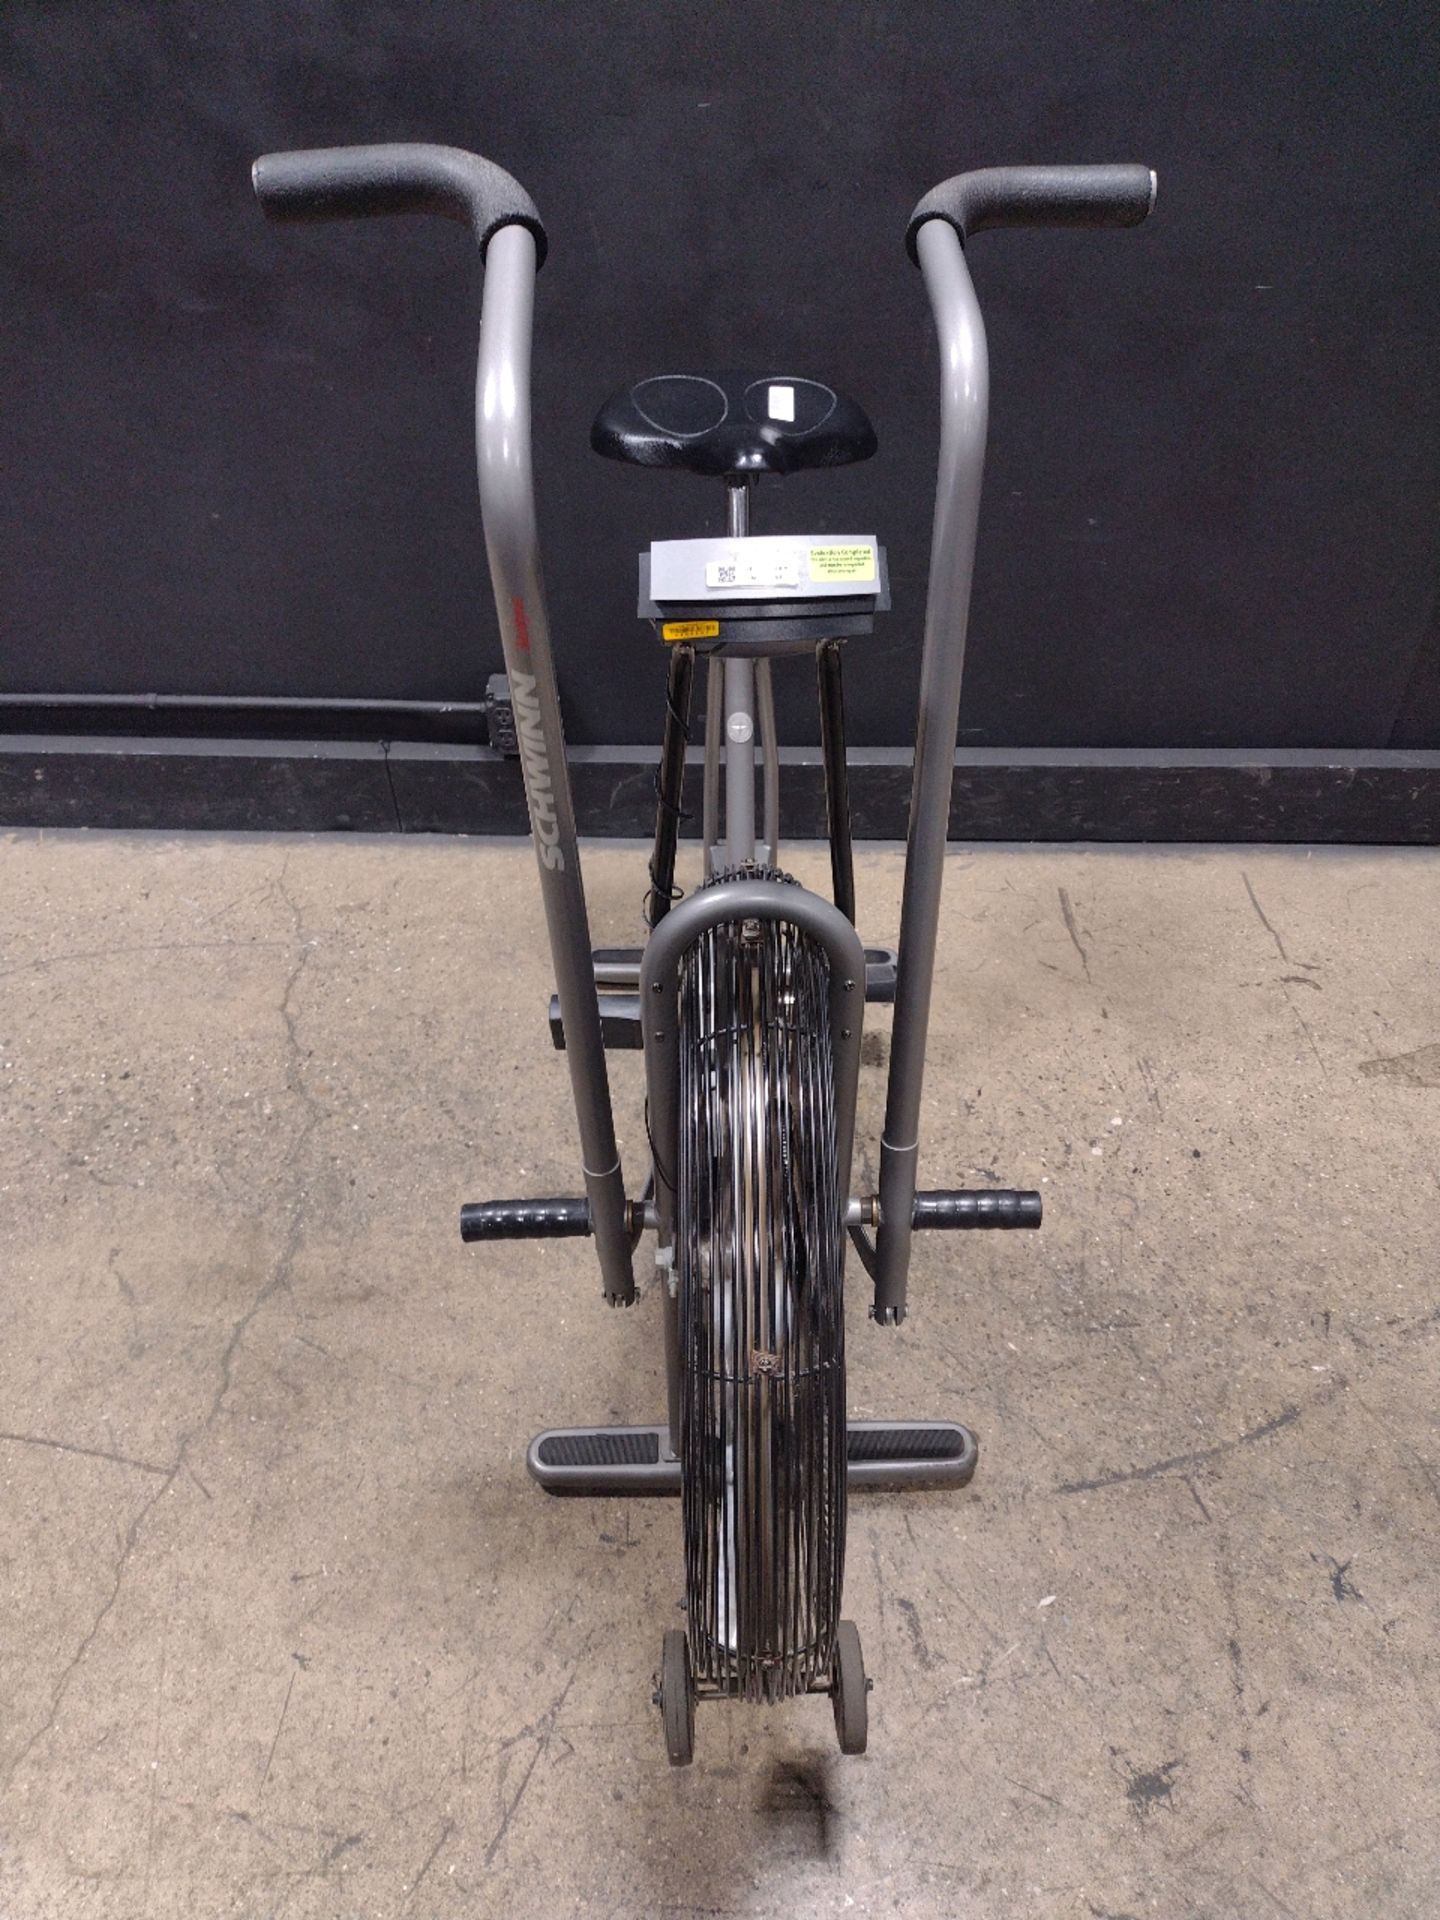 SCHWINN AIRDYNE EXERCISE BIKE (LOCATED AT 3325 MOUNT PROSPECT ROAD, FRANKLIN PARK, IL, 60131)